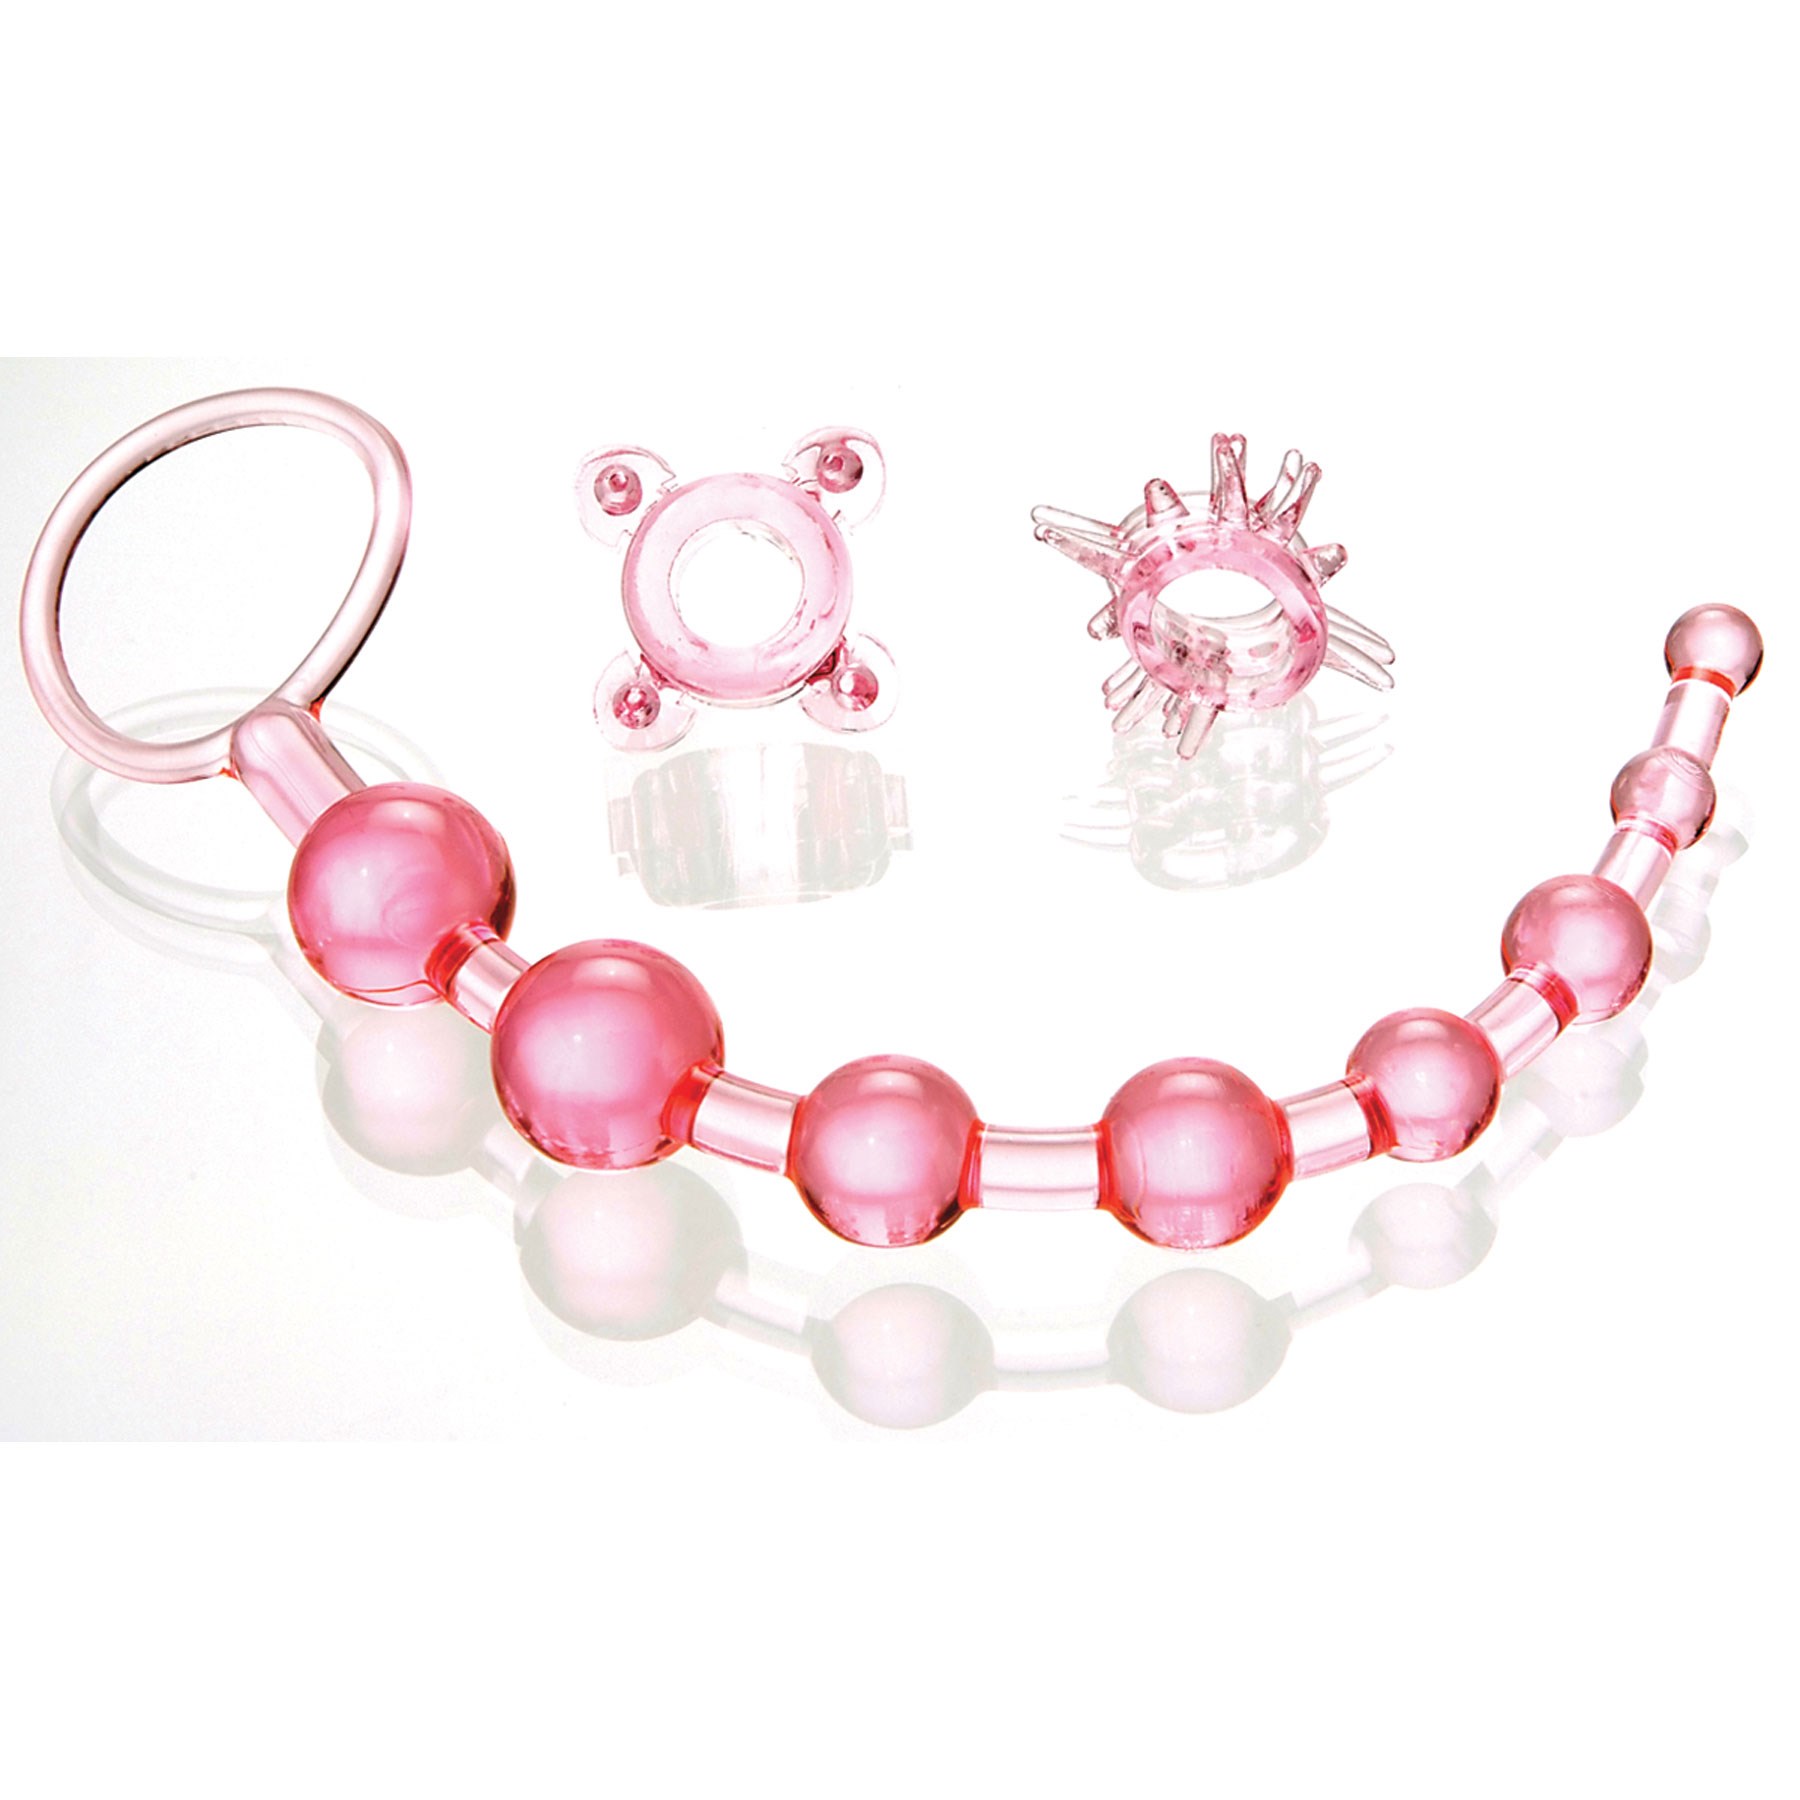 The Lover's Kit anal beads and 2 penis rings